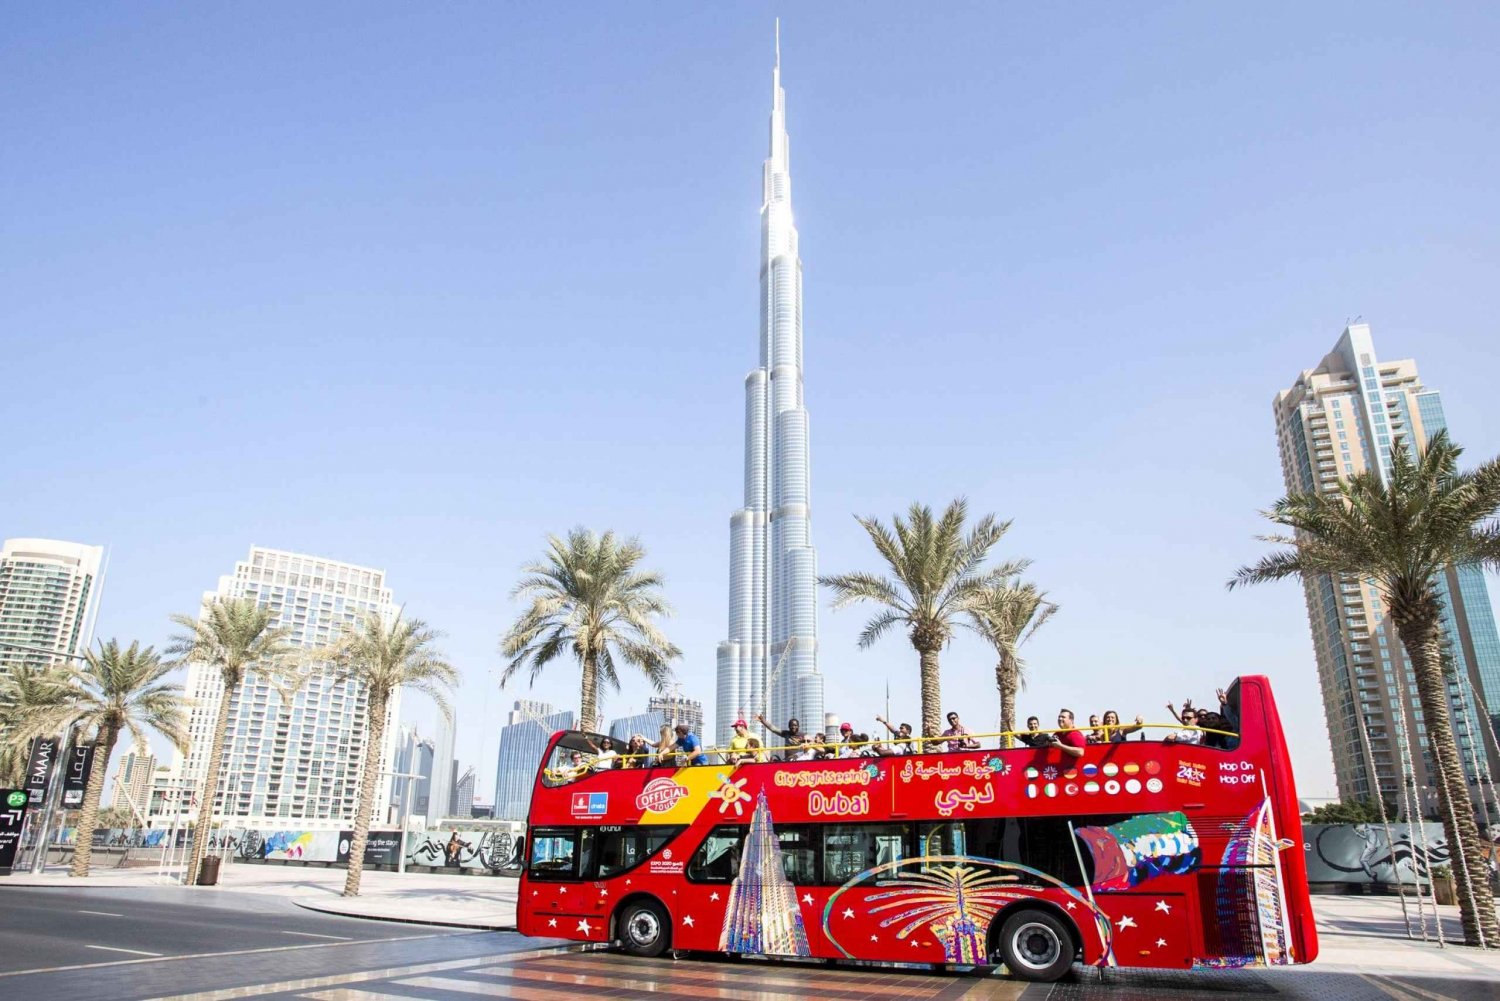 City Sightseeing Hop-On/Hop-Off-Bustour